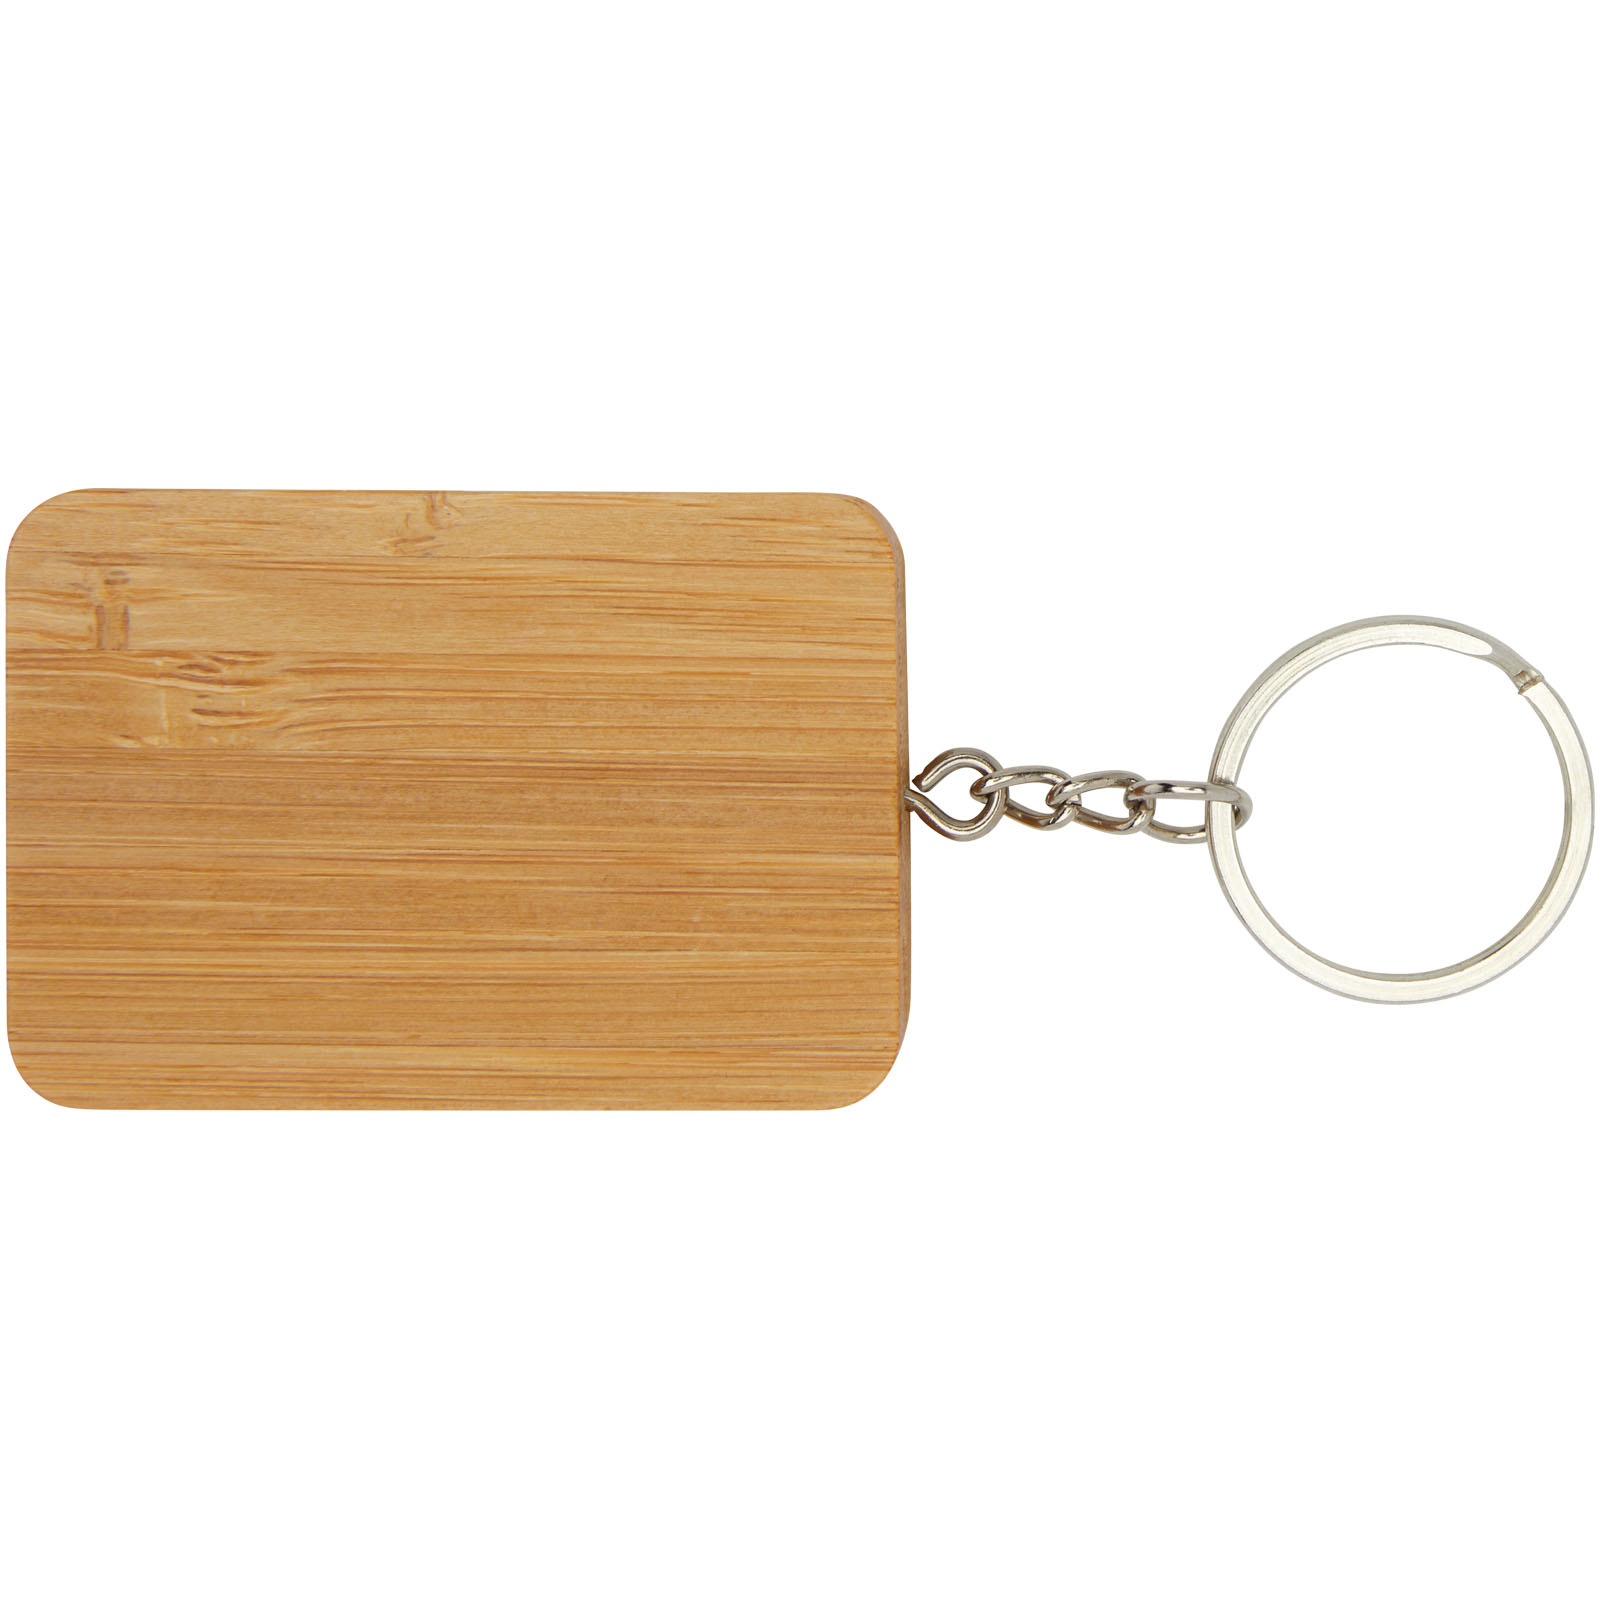 Advertising Cables - Reel 6-in-1 retractable bamboo key ring charging cable - 2